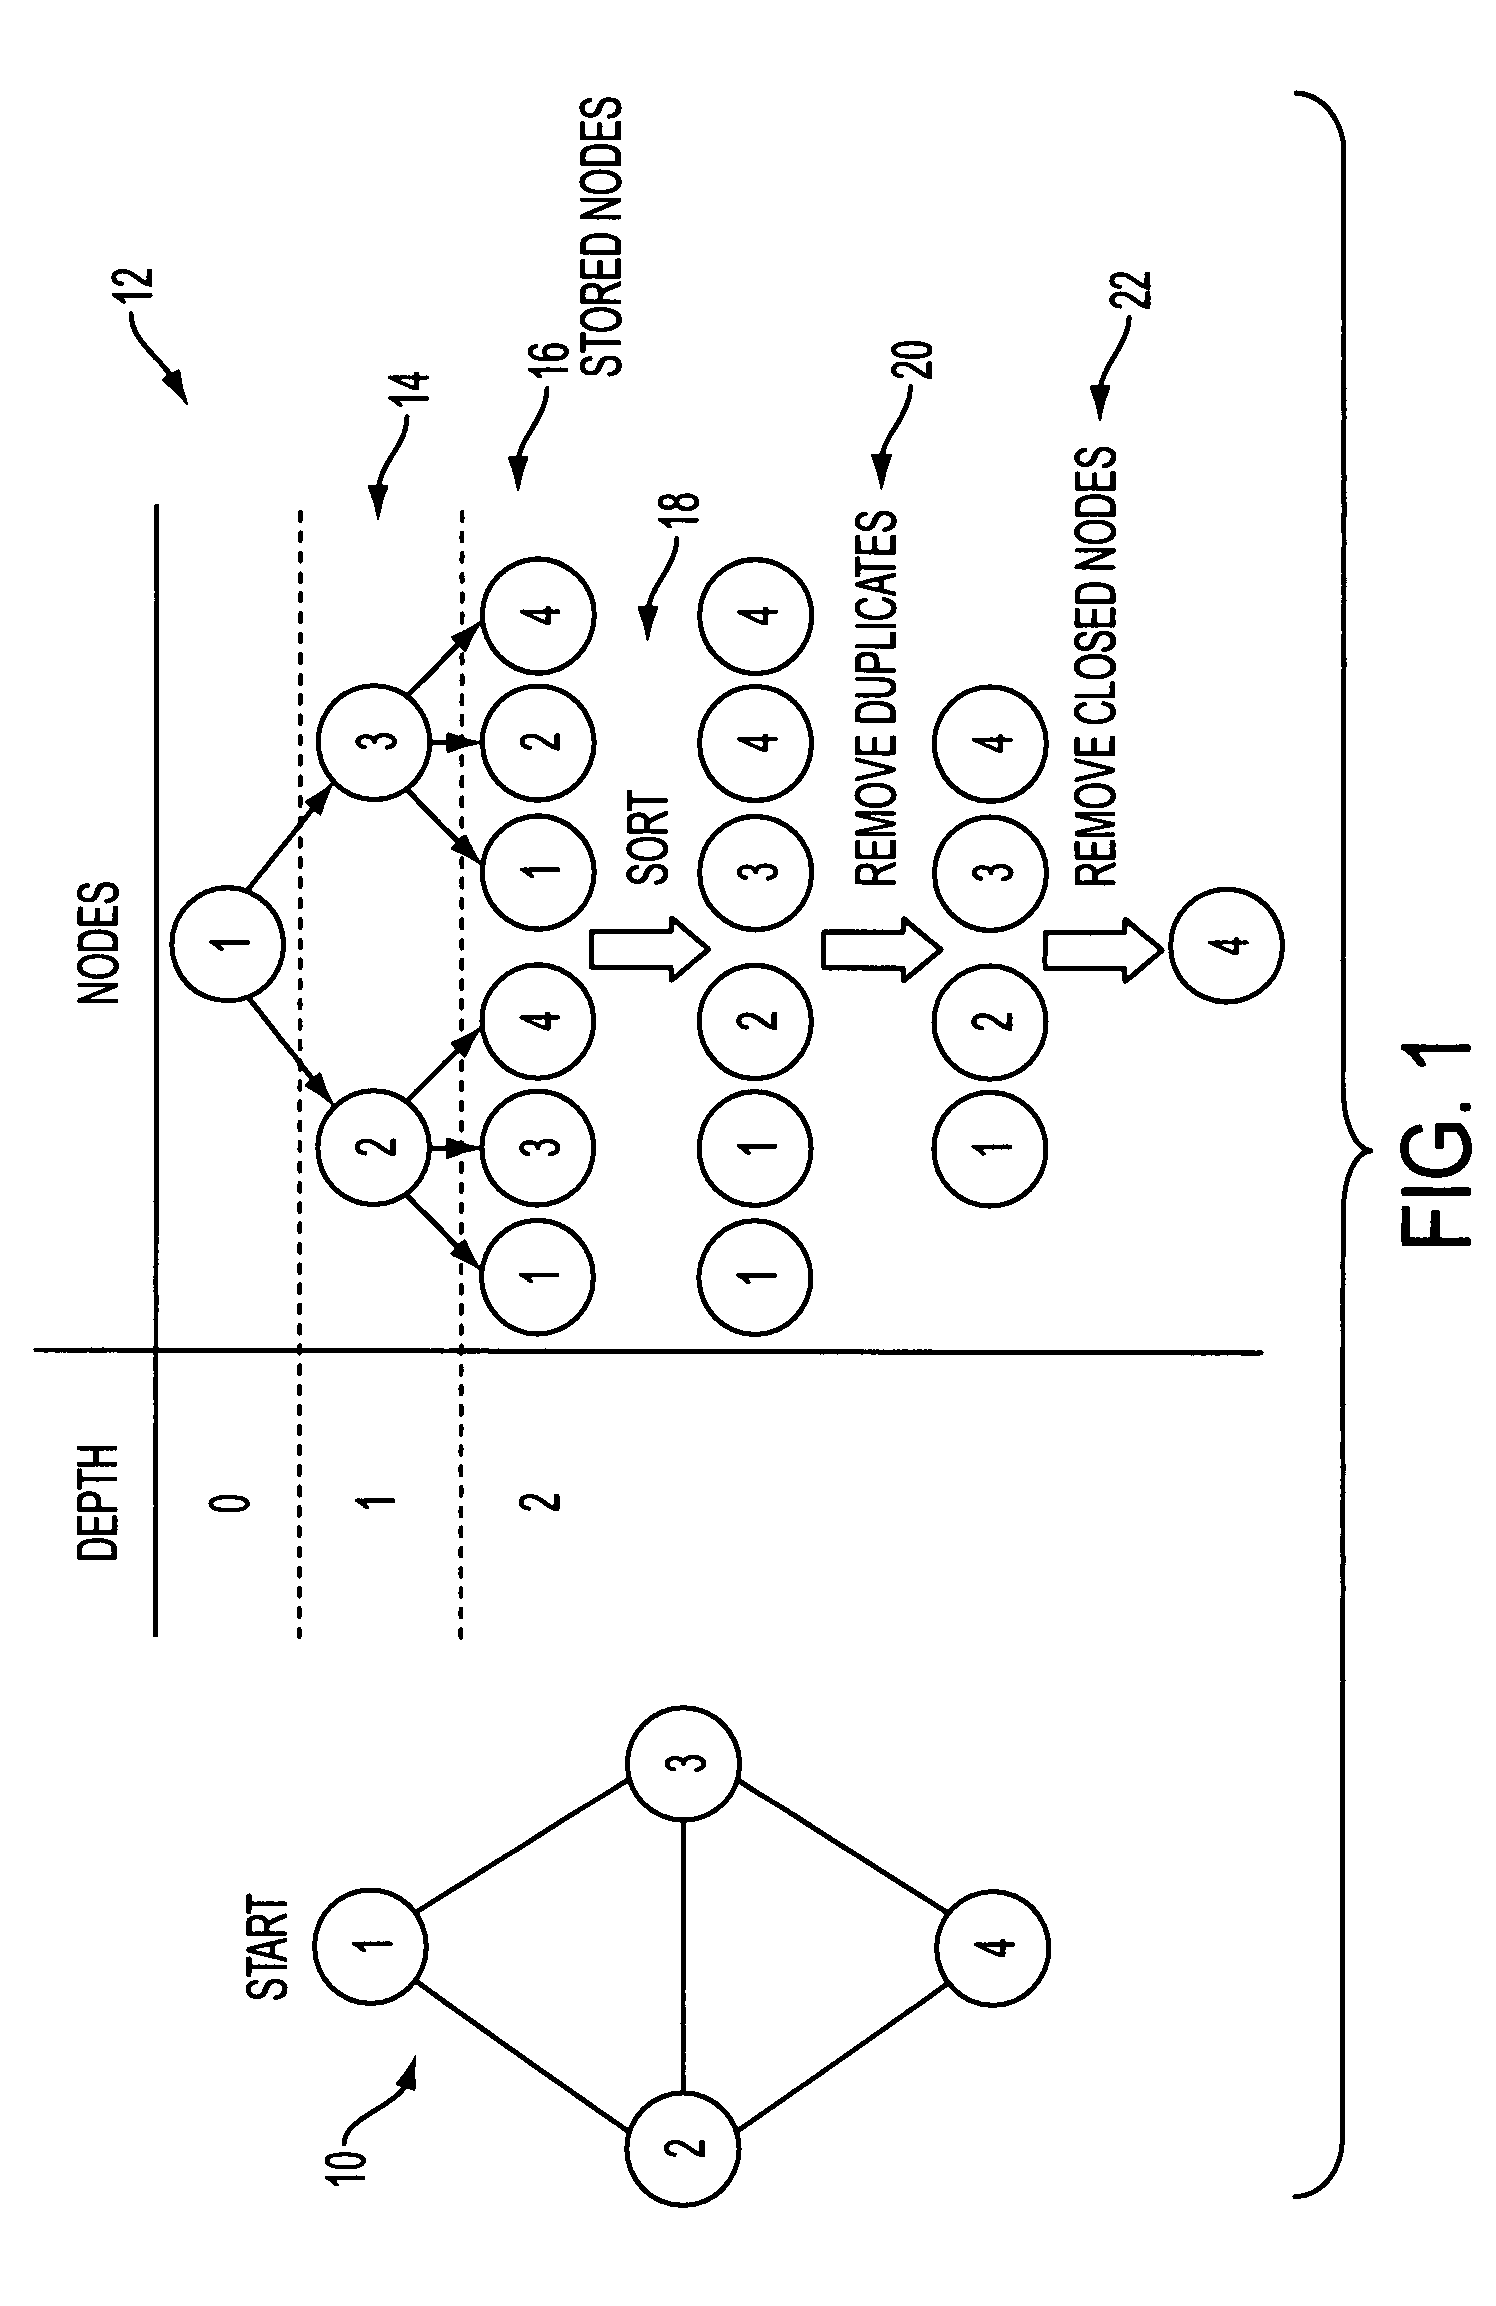 System and method for parallel graph search utilizing parallel structured duplicate detection